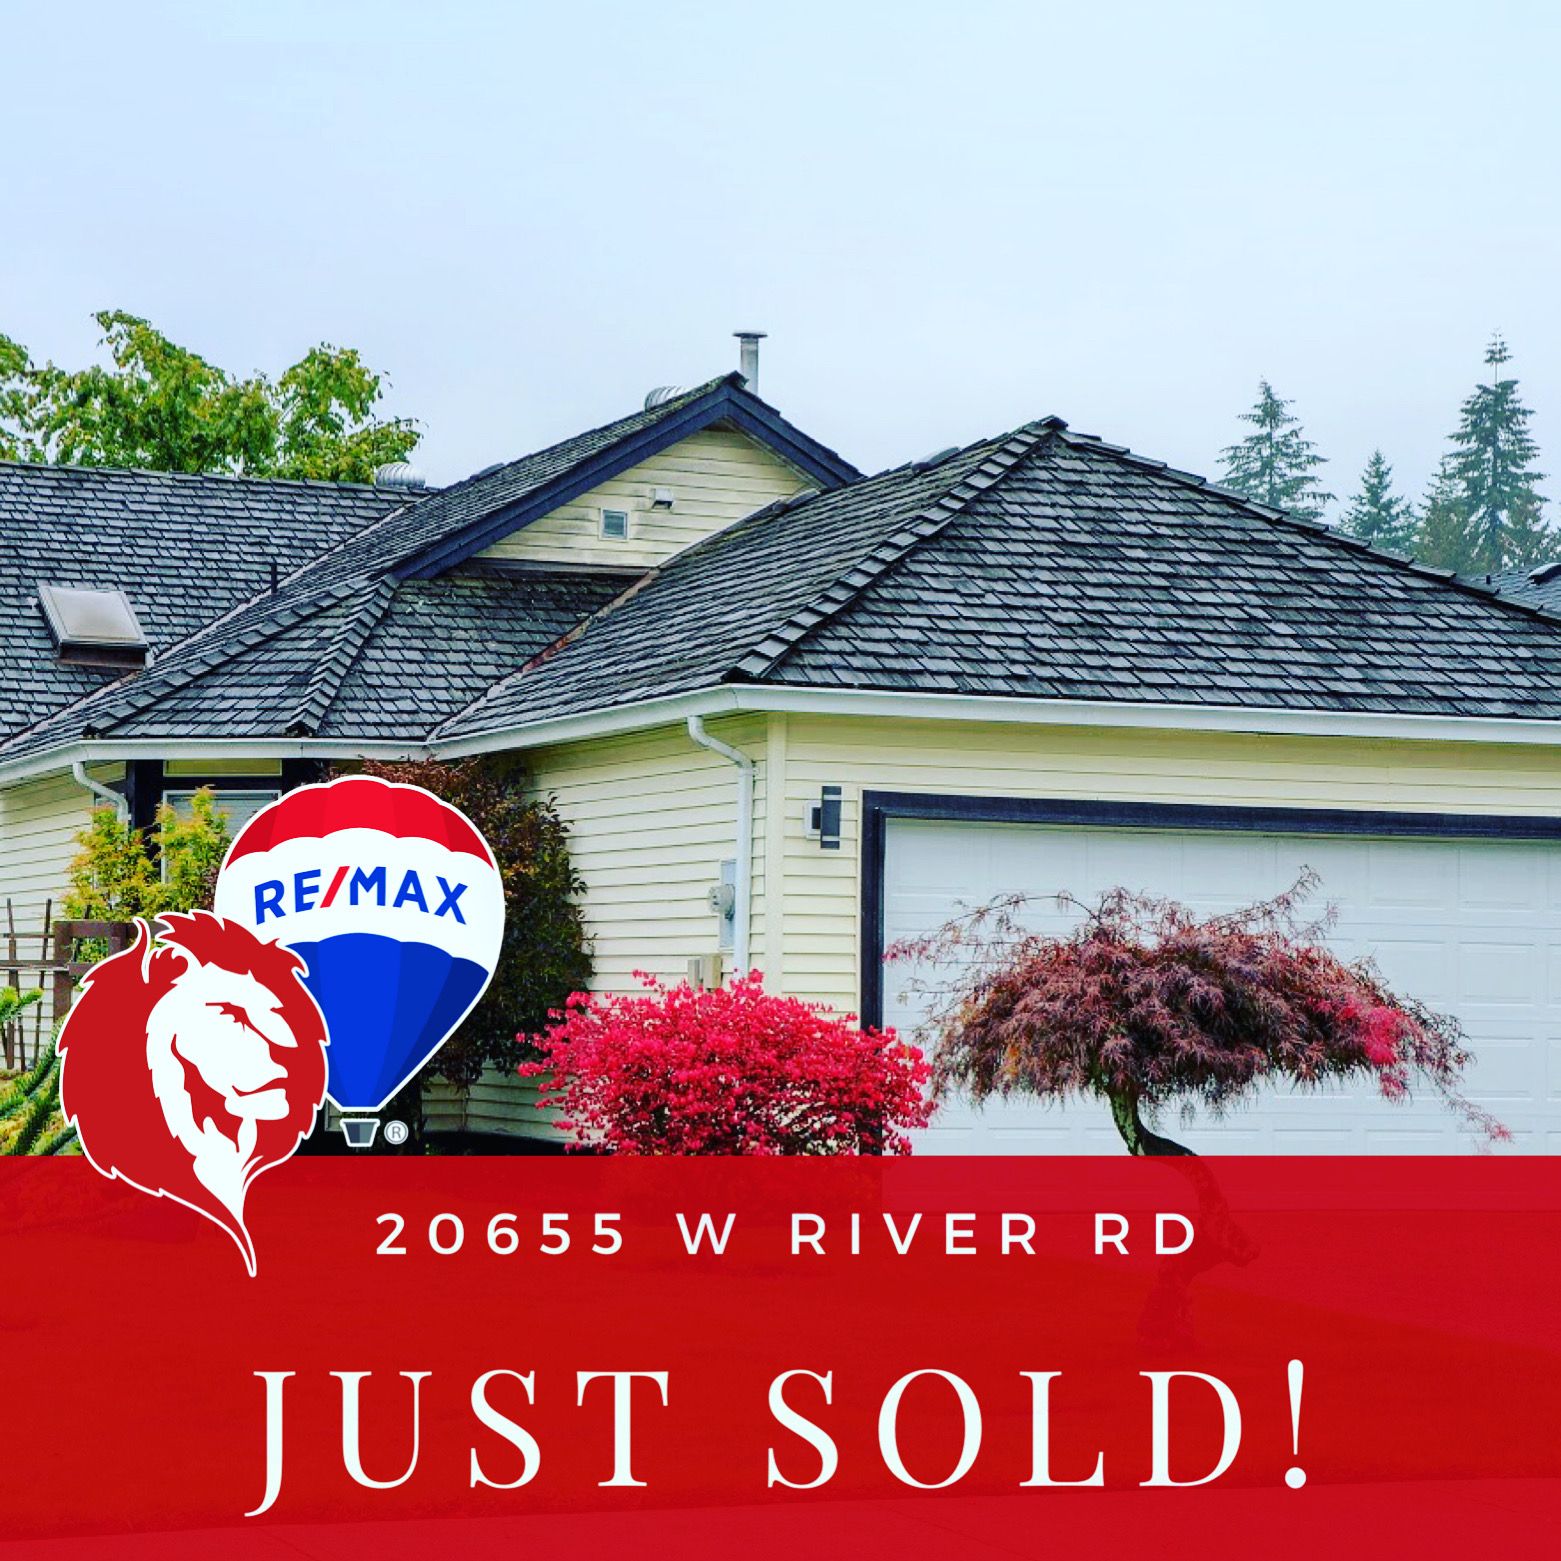 JUST SOLD! 20655 W River Rd, Maple Ridge